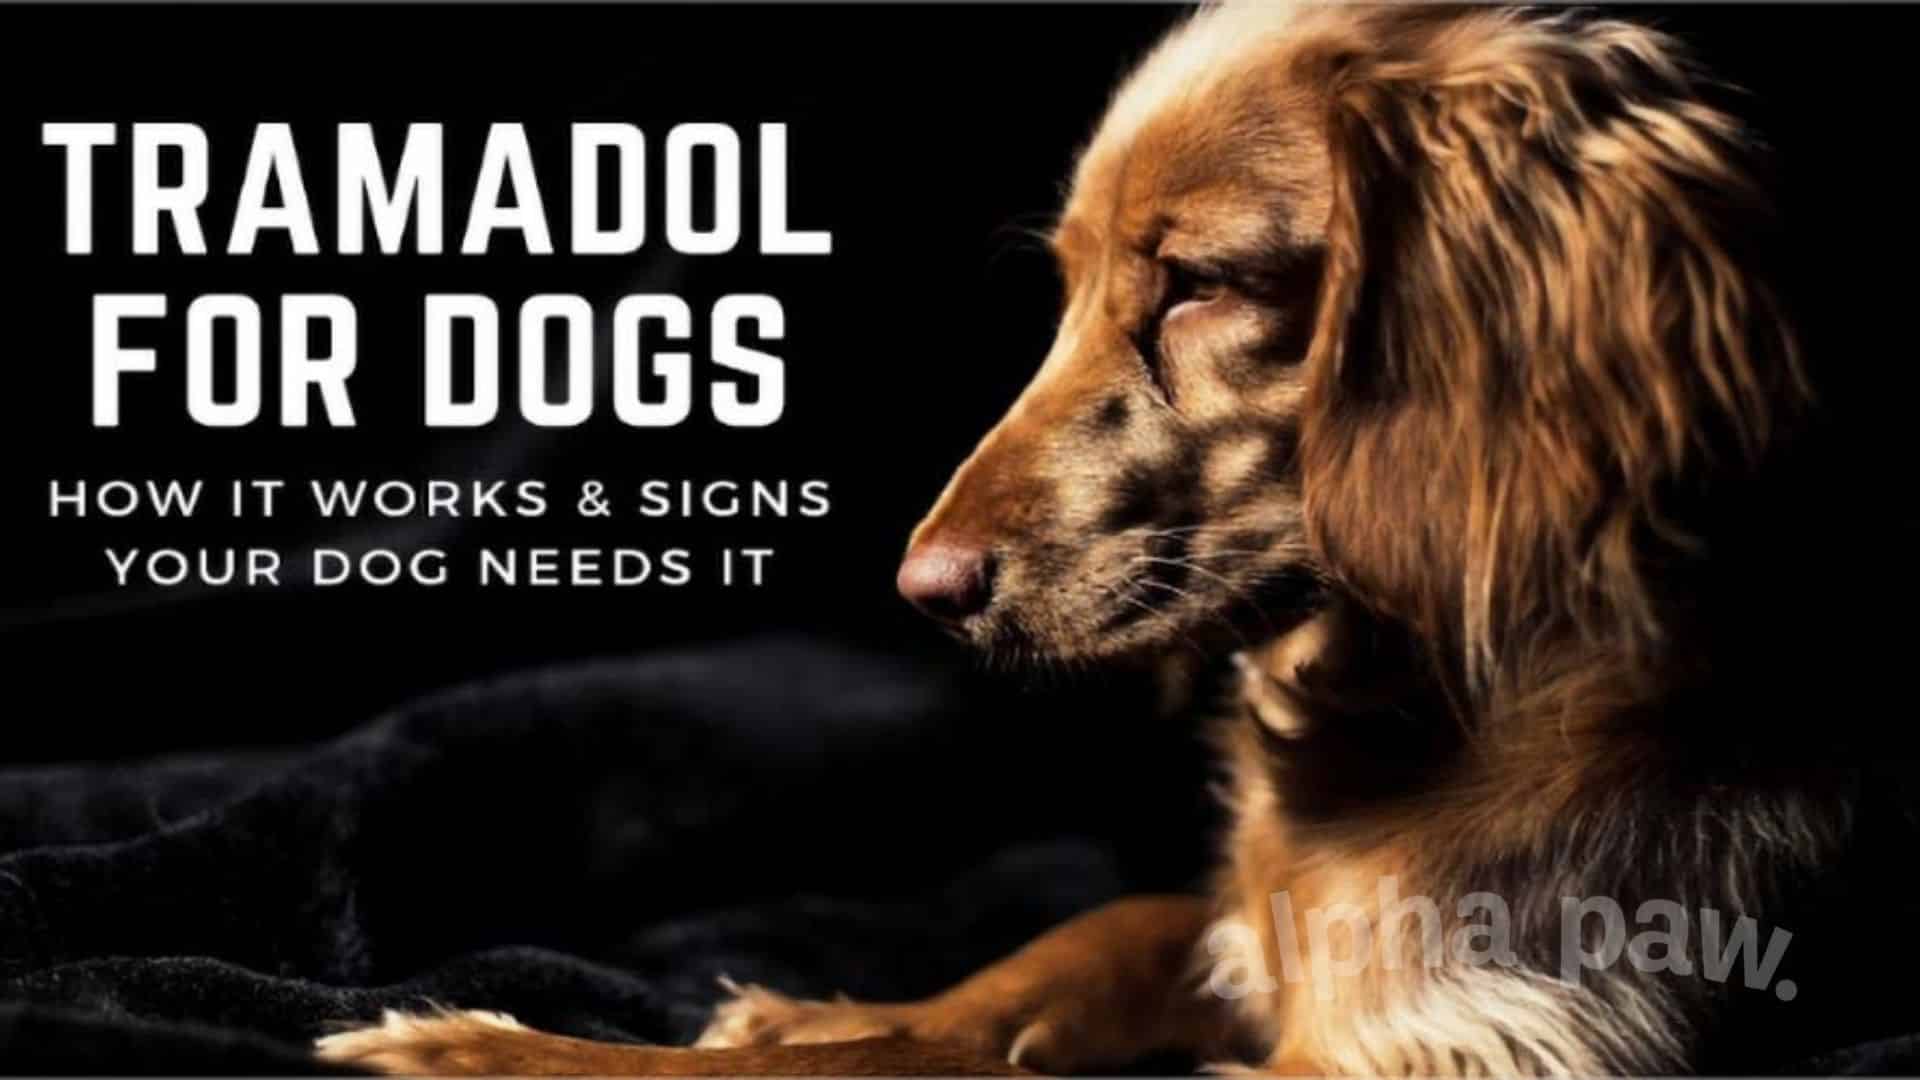 Tramadol for Dogs: How It Works & Signs Your Dog Needs It